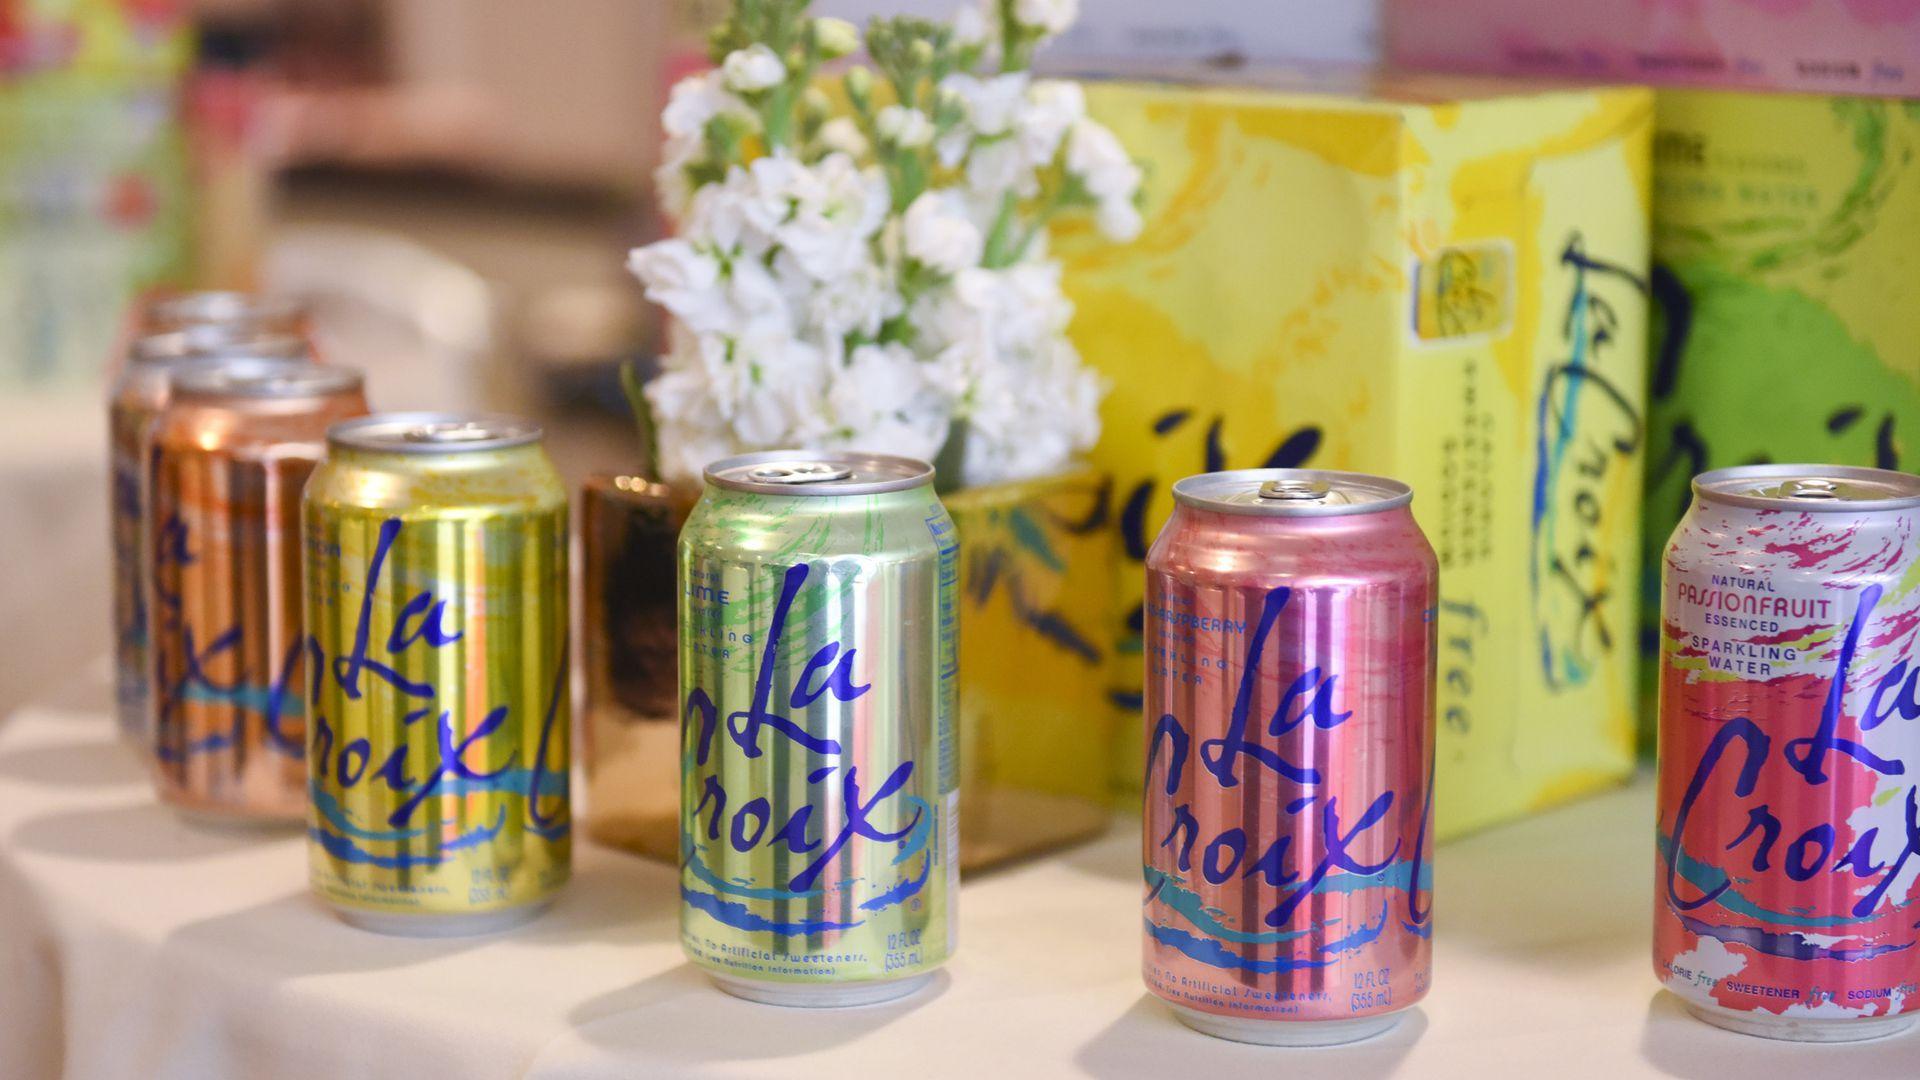 LaCroix billionaire accused of harassment and unwanted touching